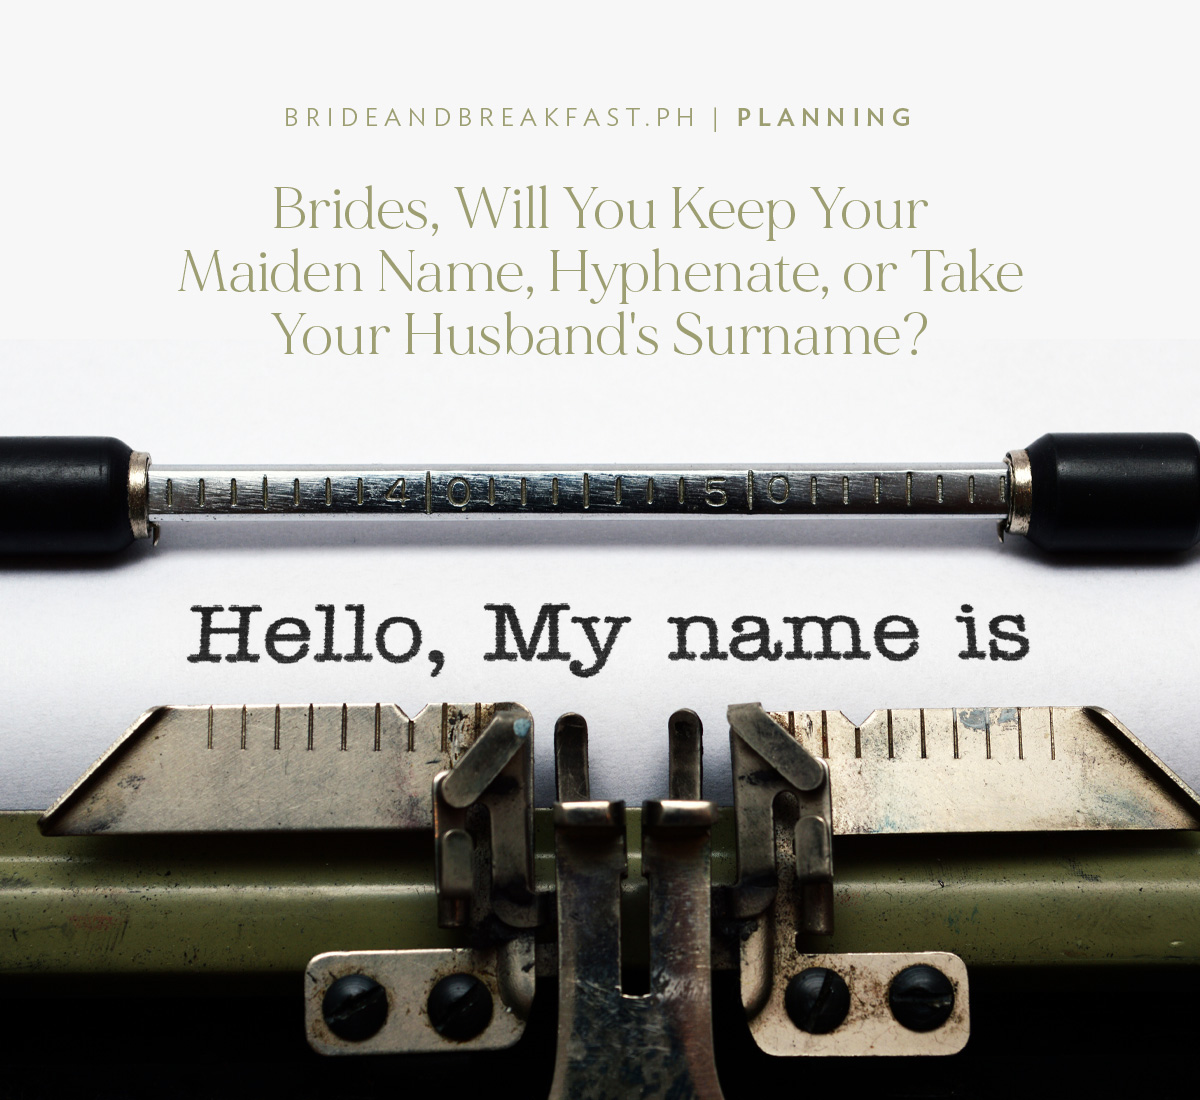 Brides, Will You Keep Your Maiden Name, Hyphenate, or Take Your Husband's Surname?